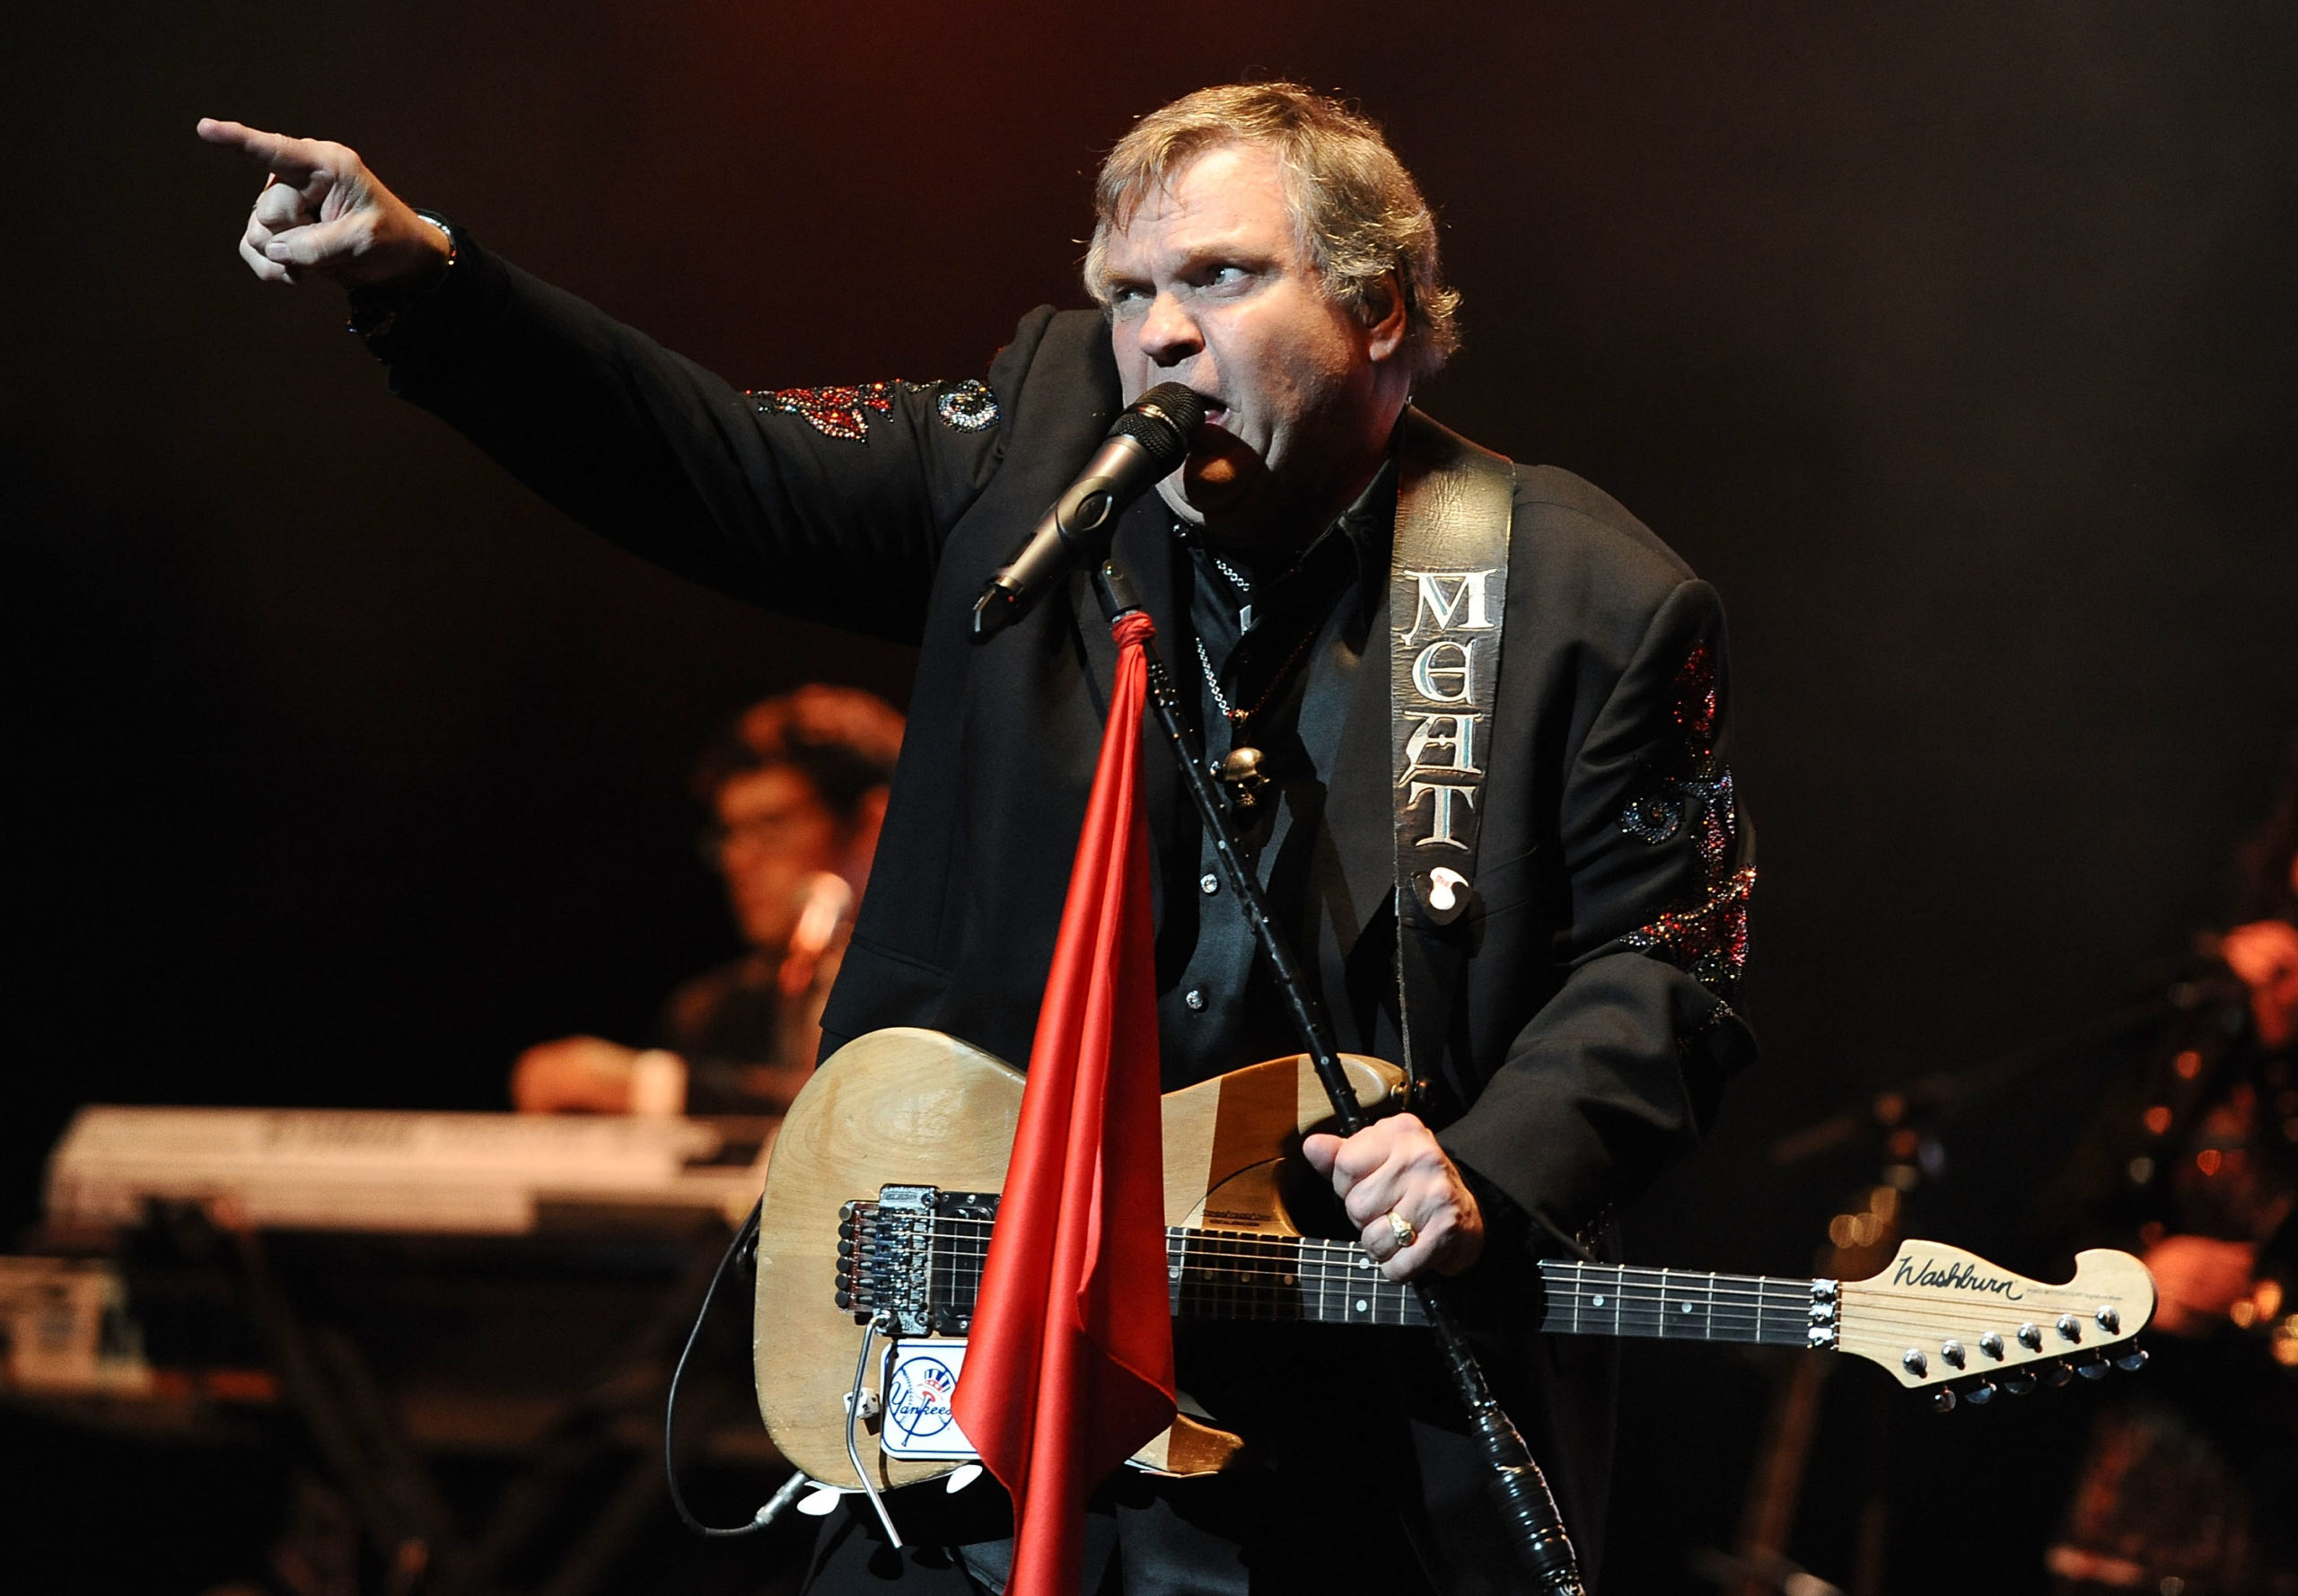 Celebrities and colaborators pay tribute to Meat Loaf with “A Legend”